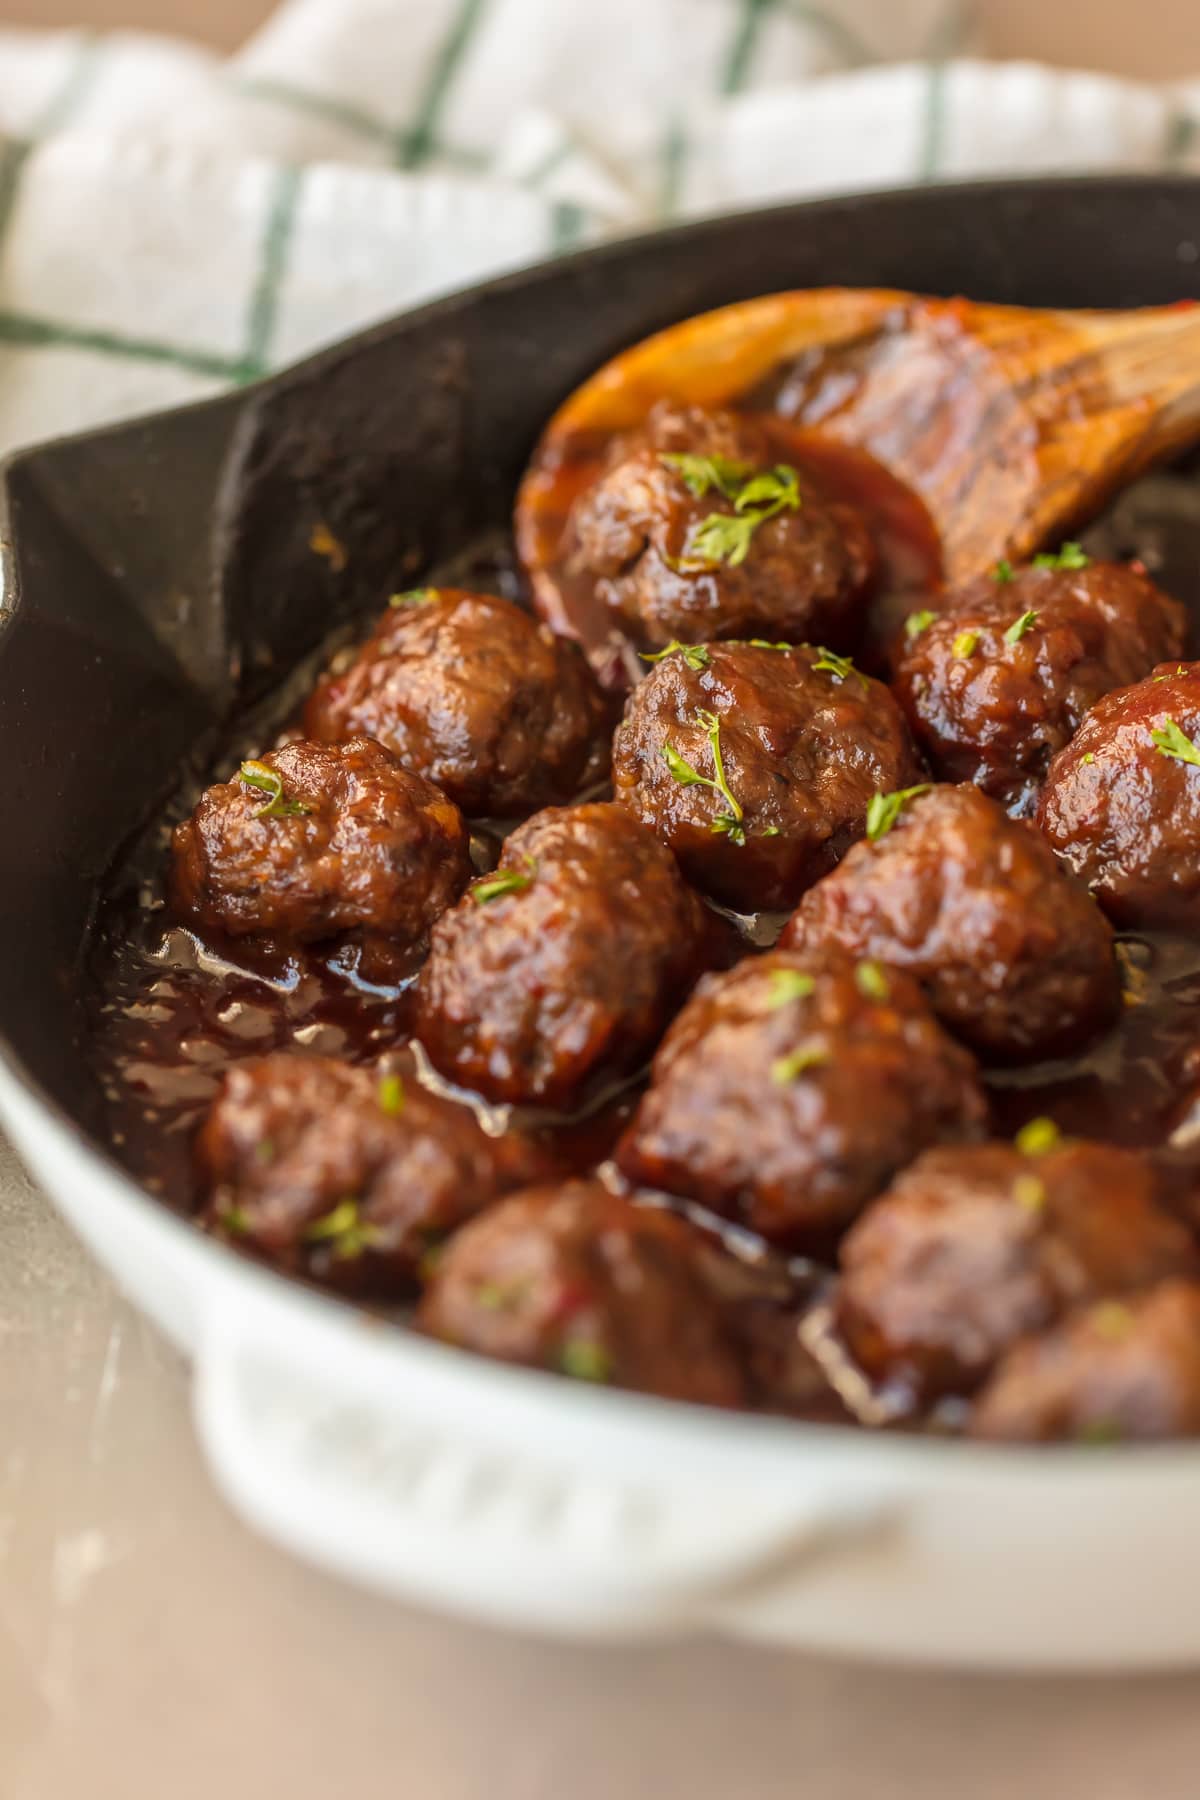 Cocktail Meatballs Recipe (Sweet and Spicy Cranberry Meatballs)